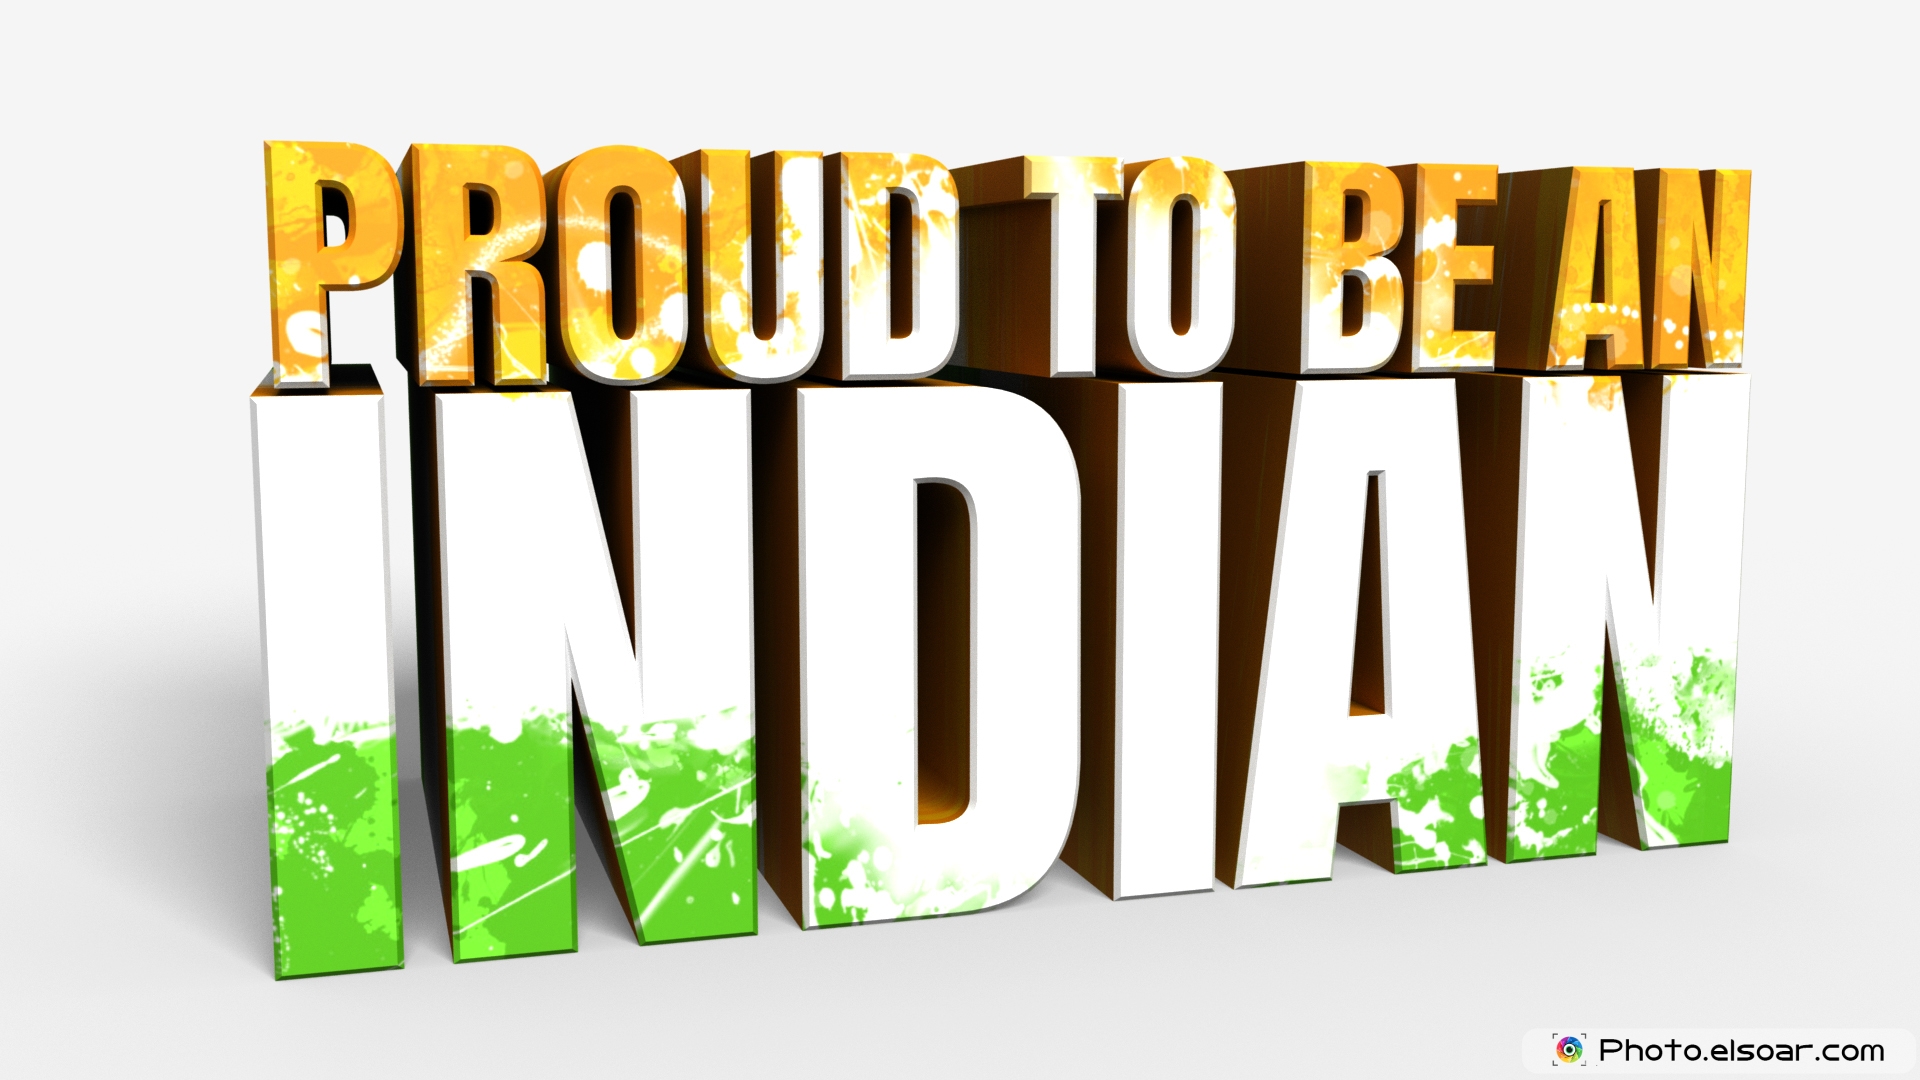 Am I proud to be an Indian?